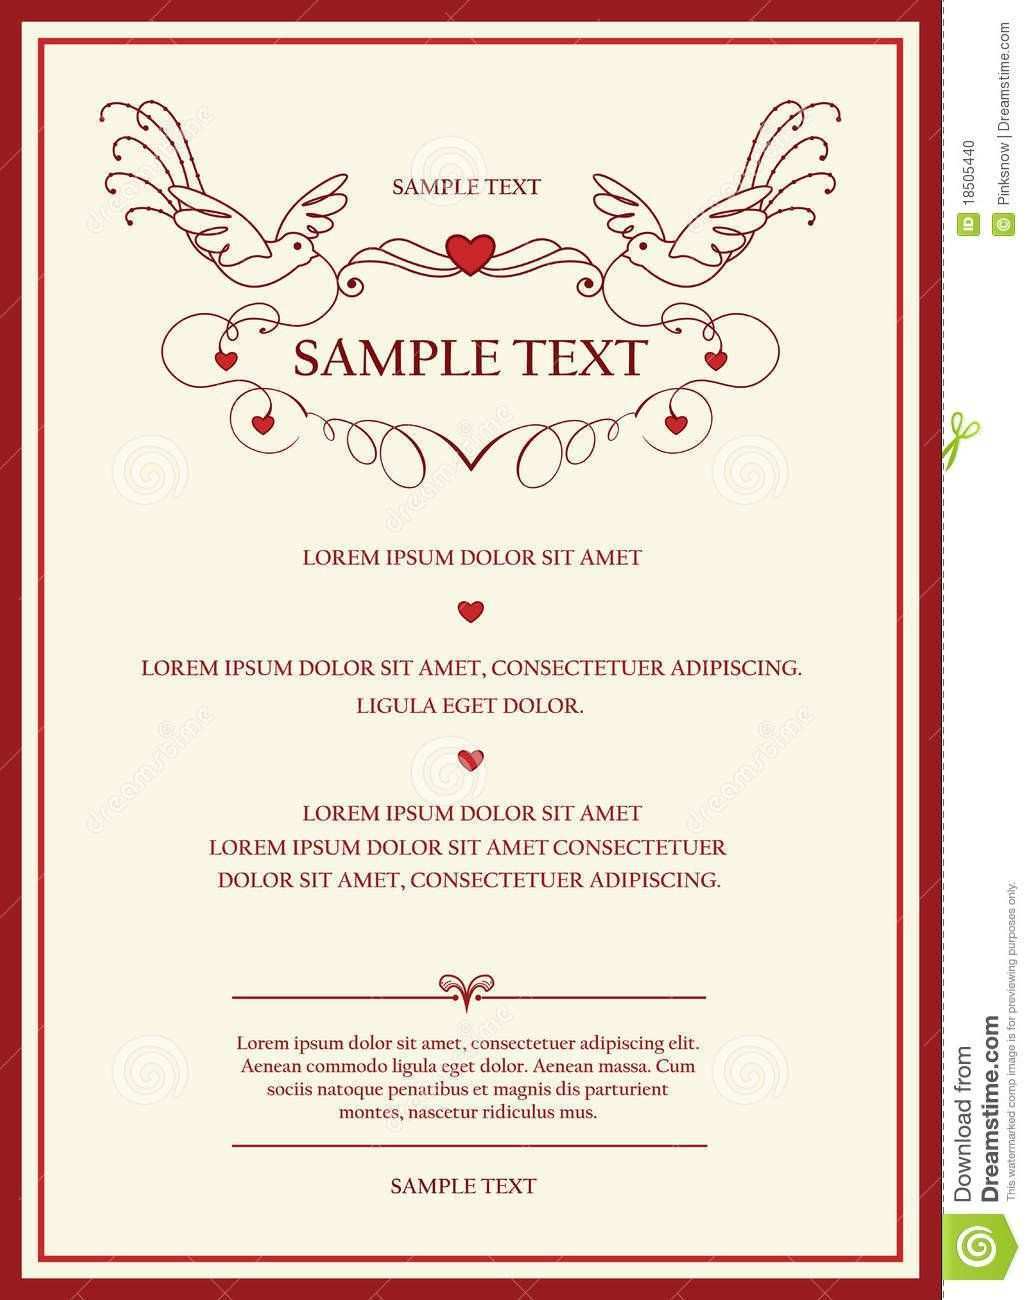 28 Report Example Of Invitation Card With Stunning Design with Example Of Invitation Card